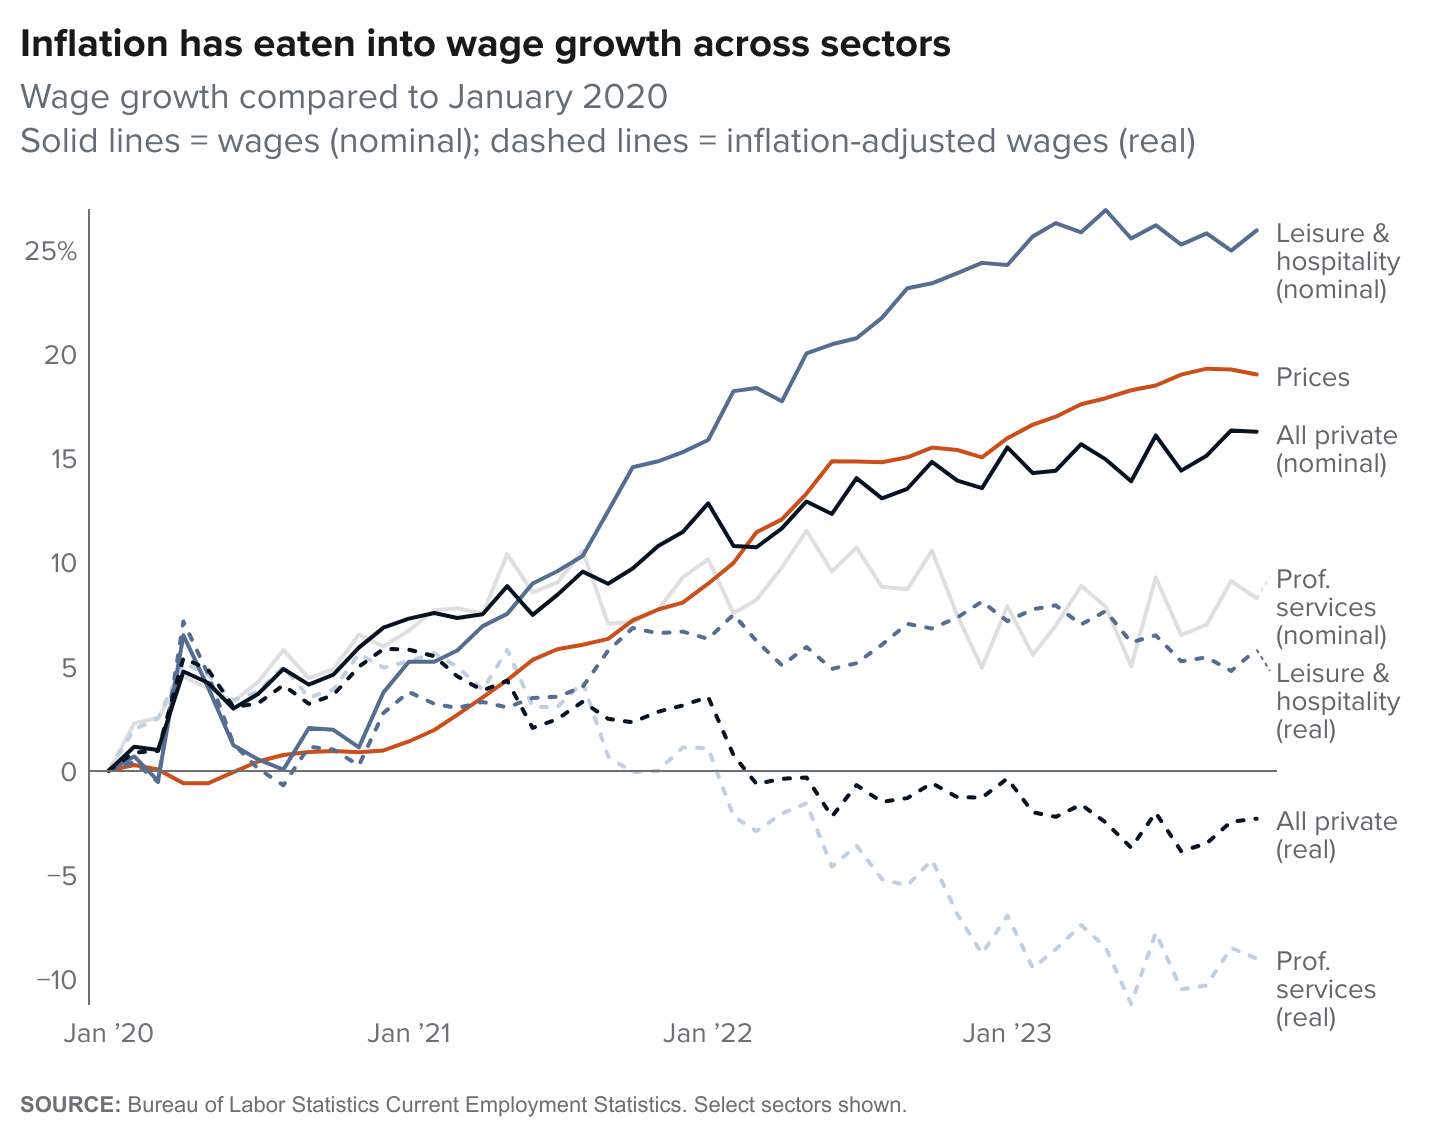 figure - Inflation has eaten into wage growth across sectors